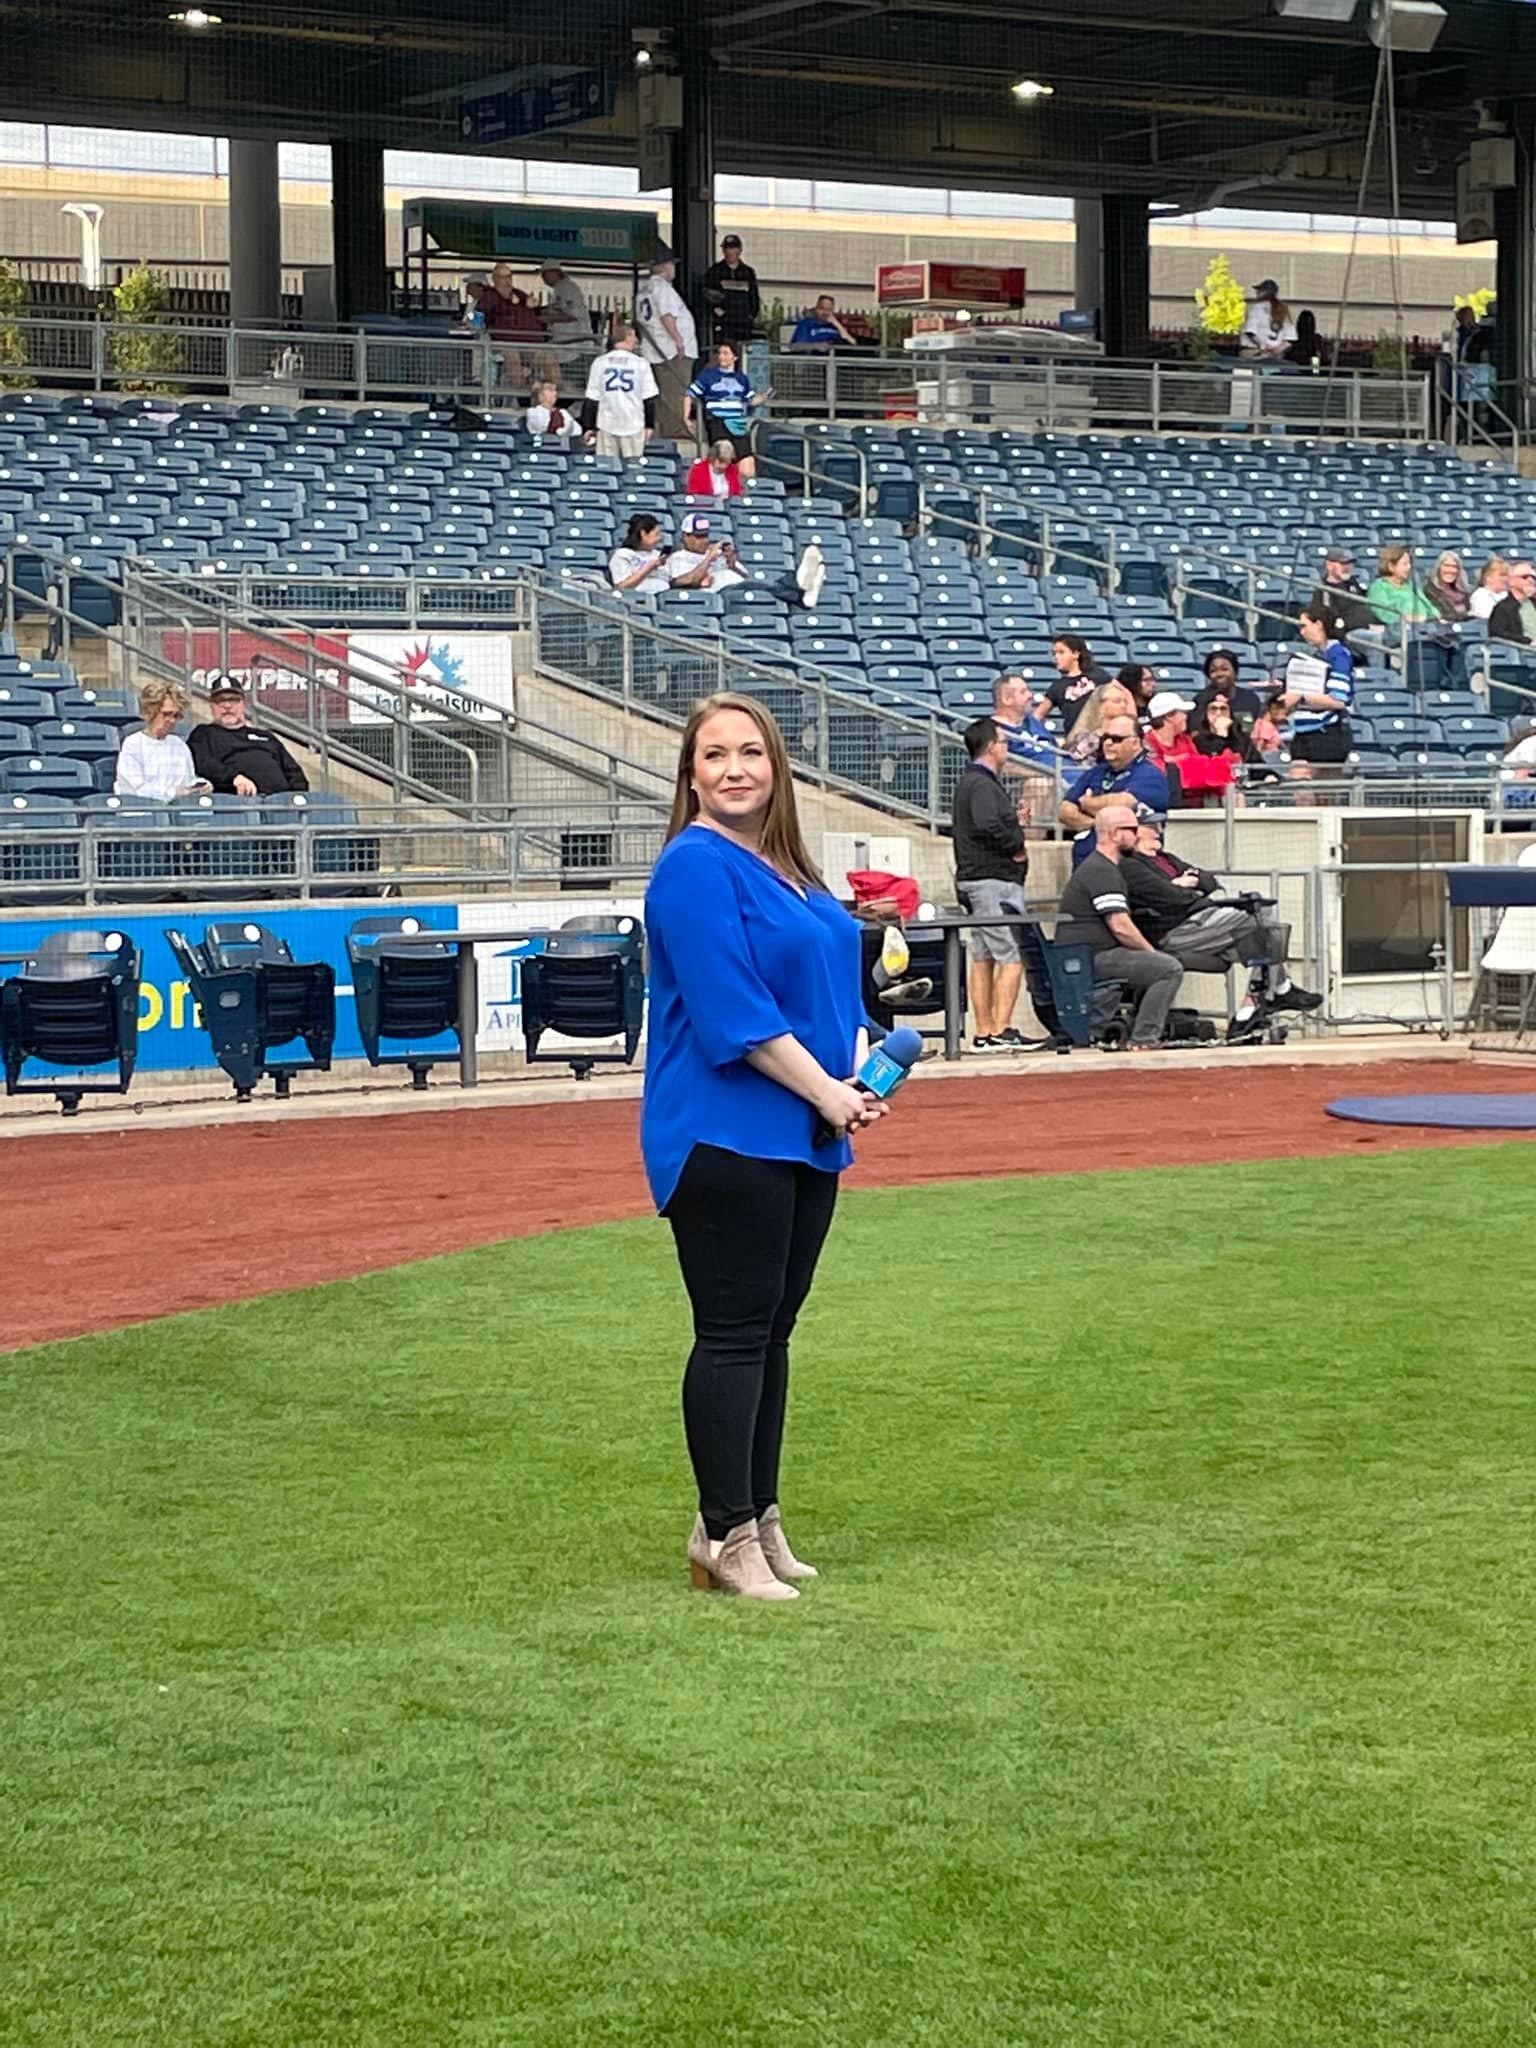 Dr. Whitney Myers on field at the Tulsa Drillers game.